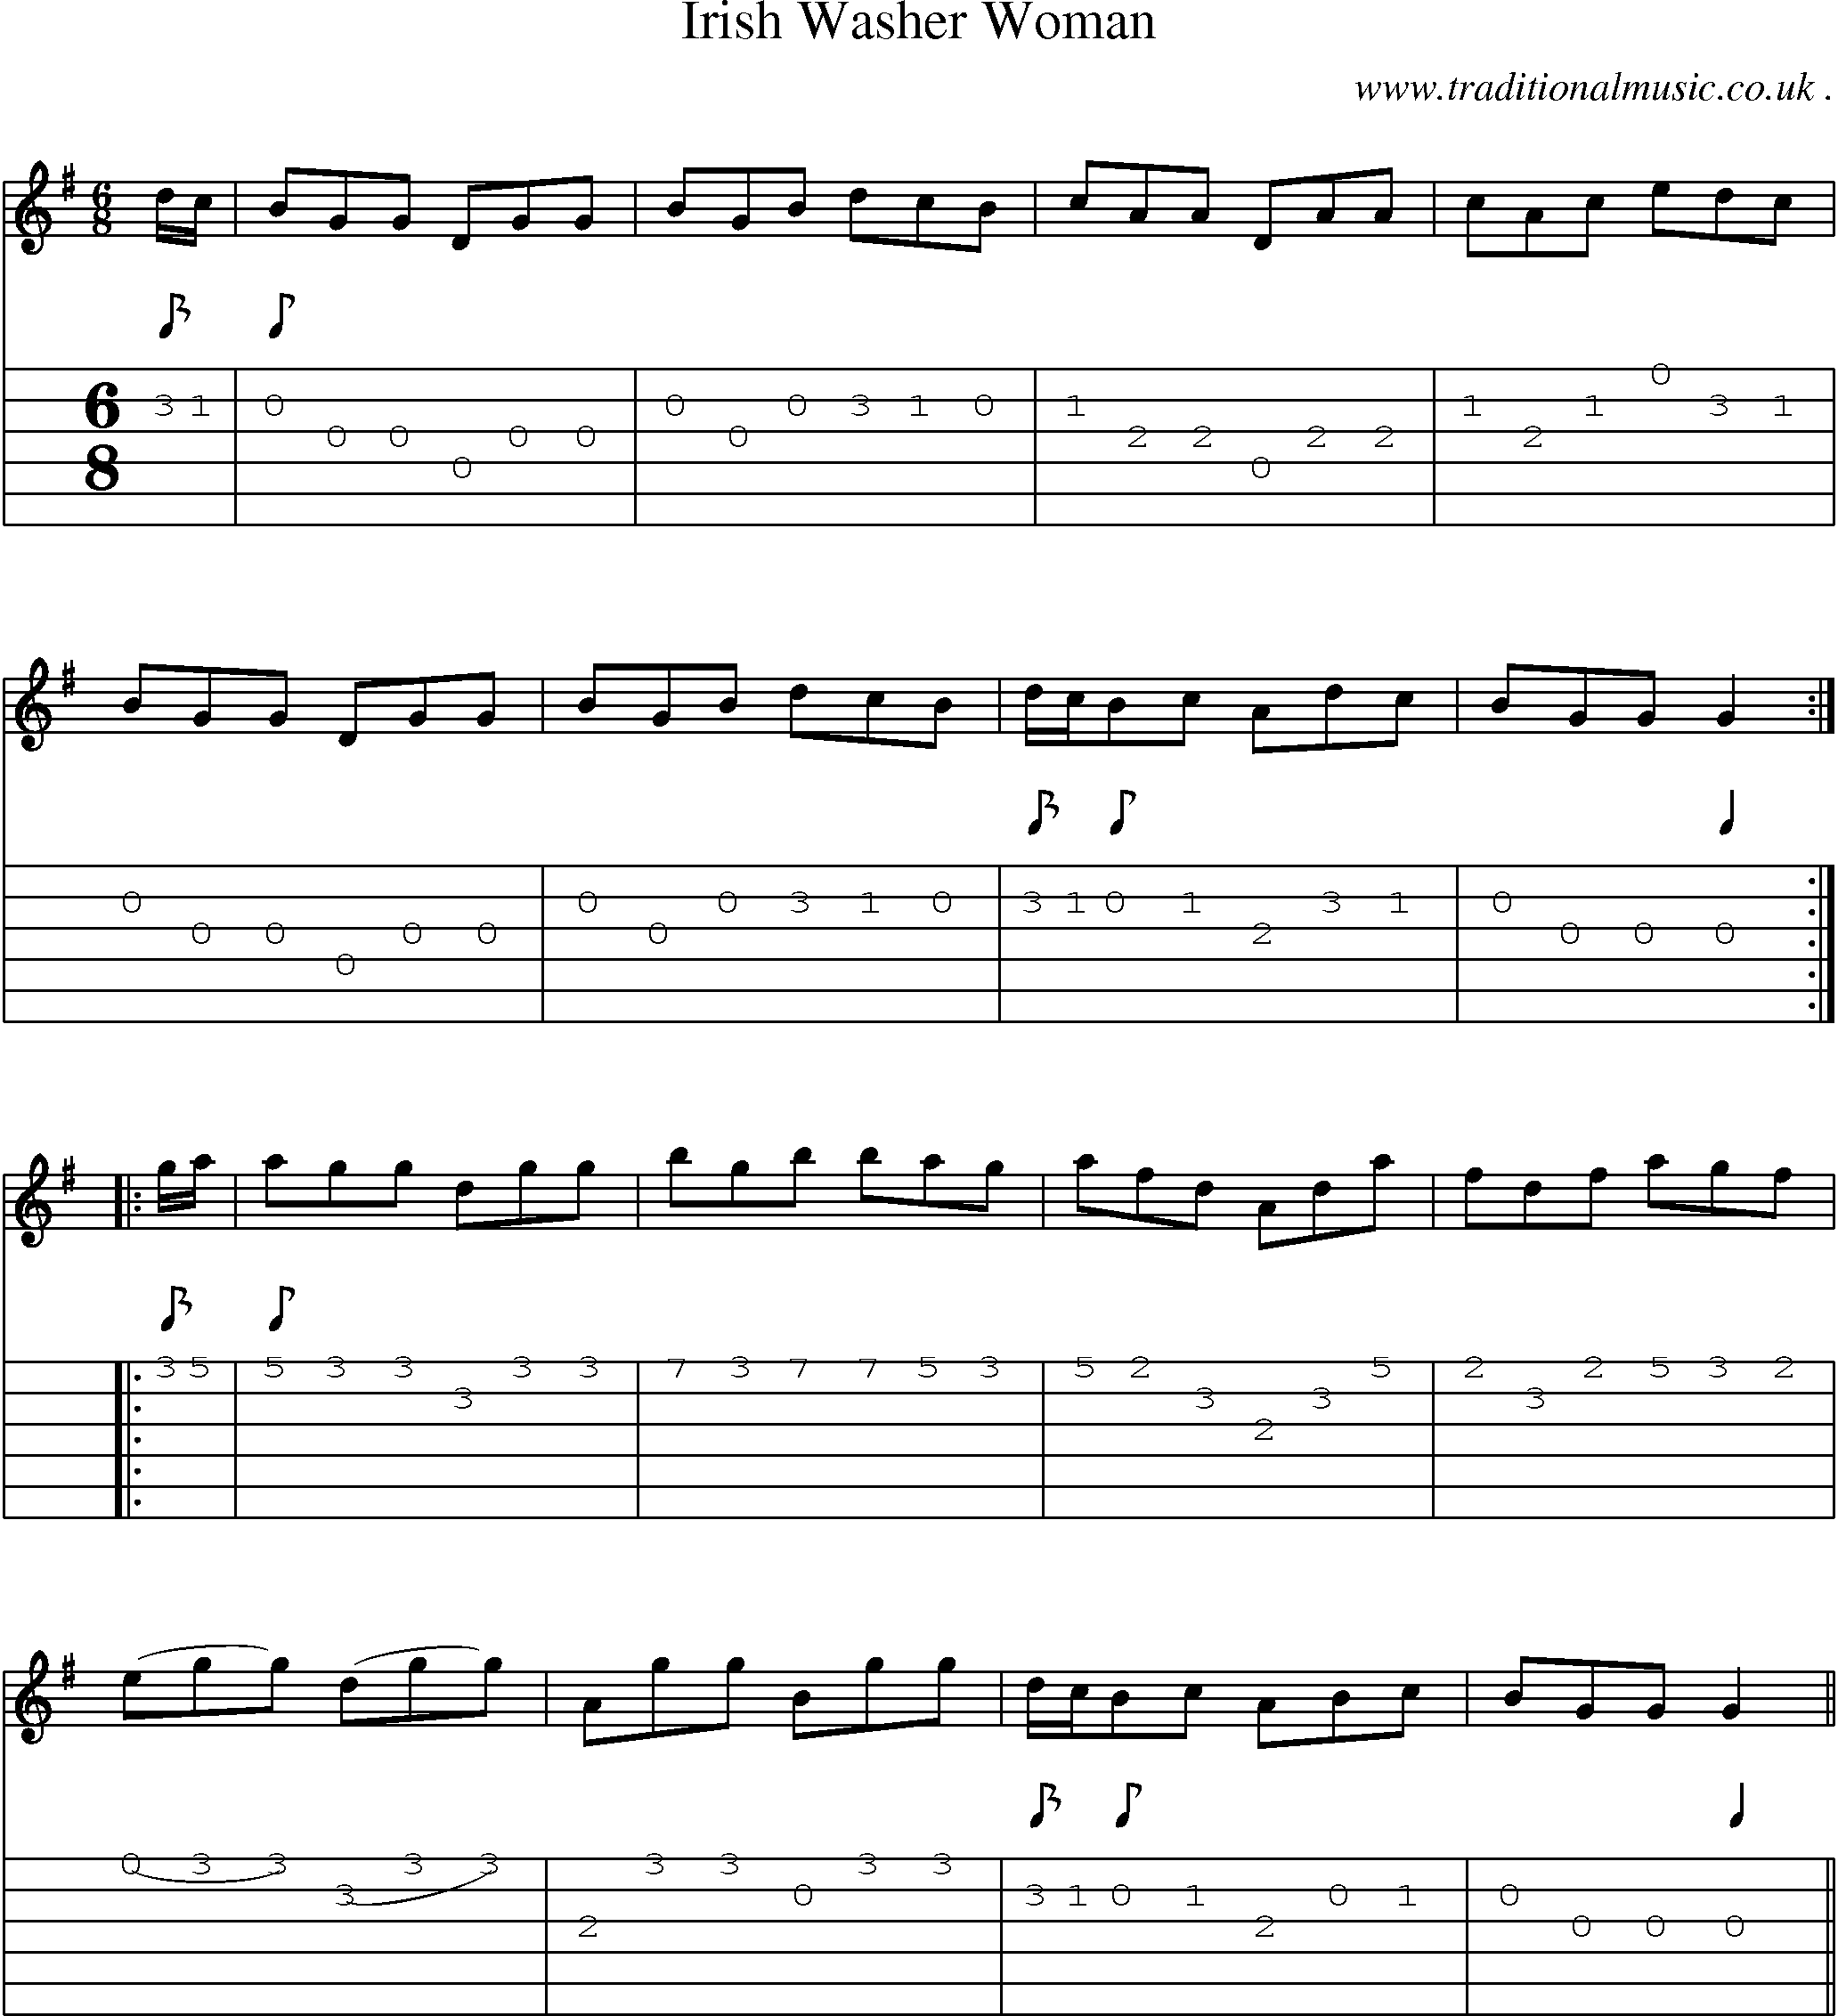 Sheet-Music and Guitar Tabs for Irish Washer Woman